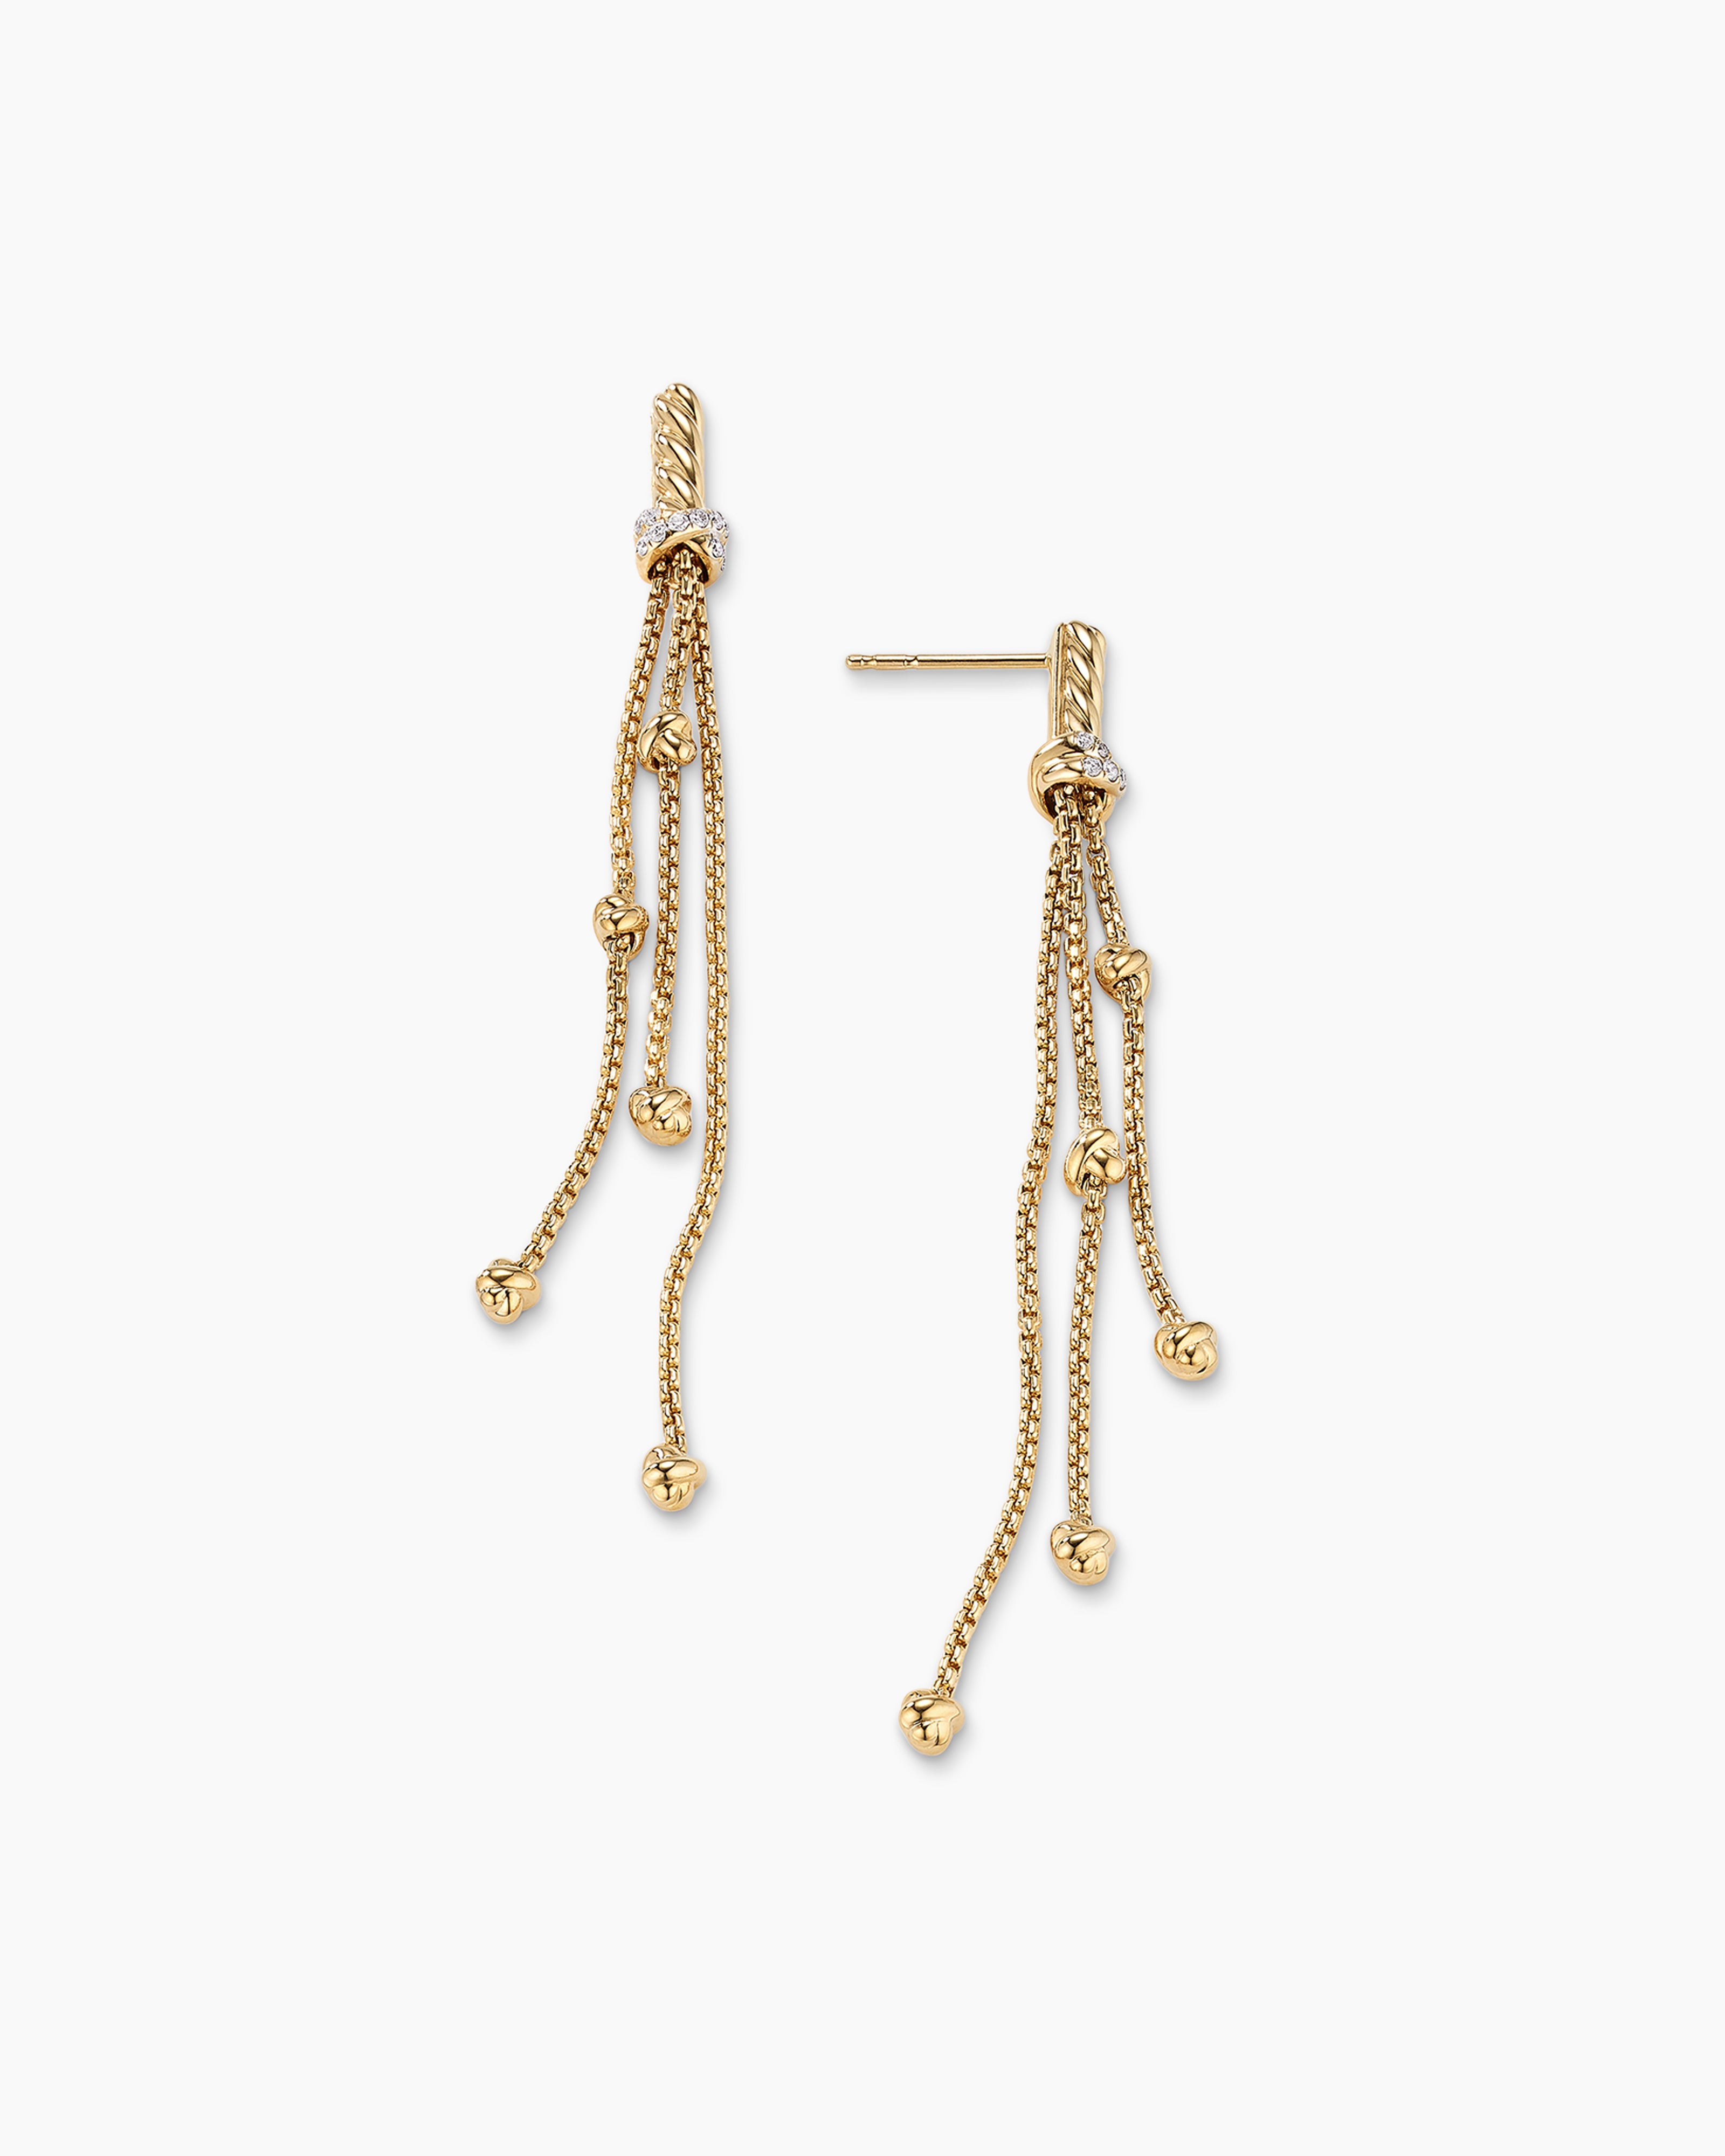 Buy Gold Plated Leafy Ghungroo Earrings Worn By Anu Immanuel | Suhani Pittie